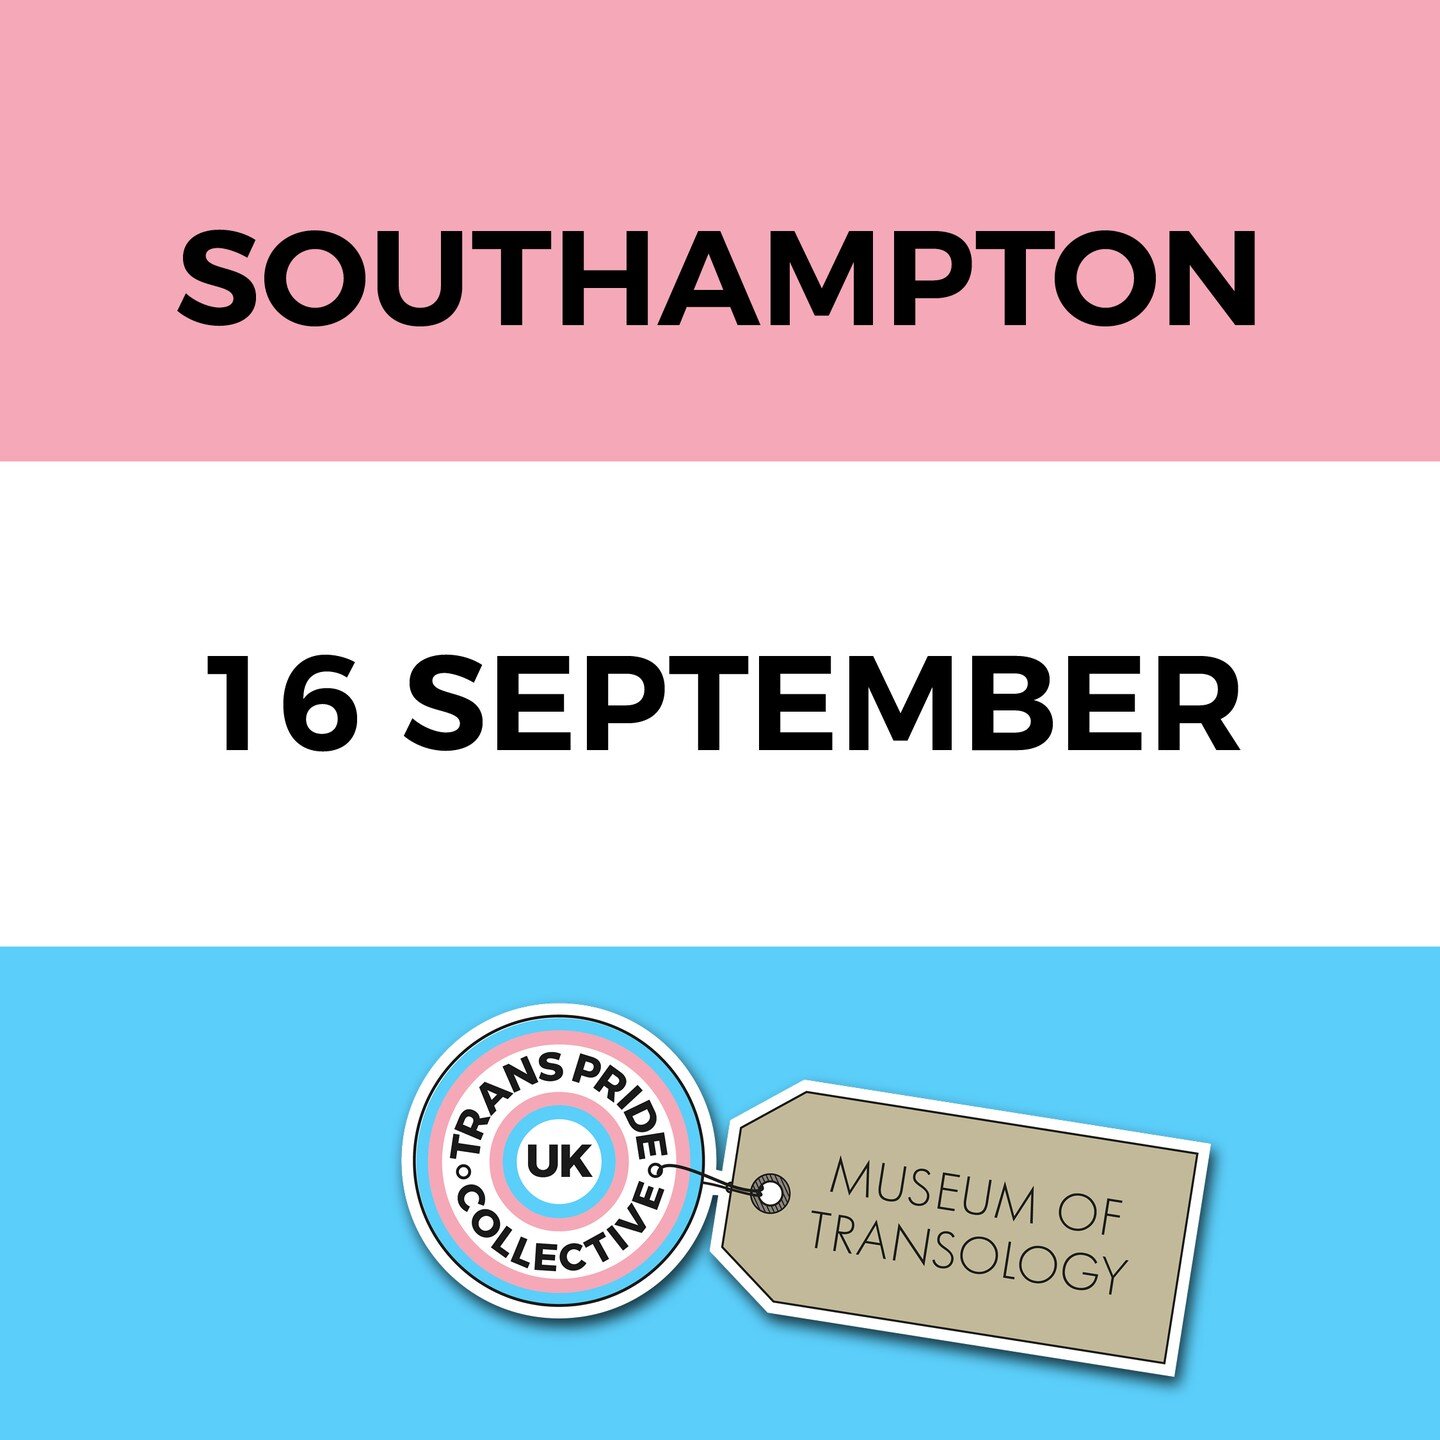 The 15th event on our Trans Pride calendar bingo is September 16th - It's People's Pride Southampton!

People's Pride Starter in 2019, but the Trans Pride contingent joined in 2022 and plans are coming together this year for a bigger event!

Expect a